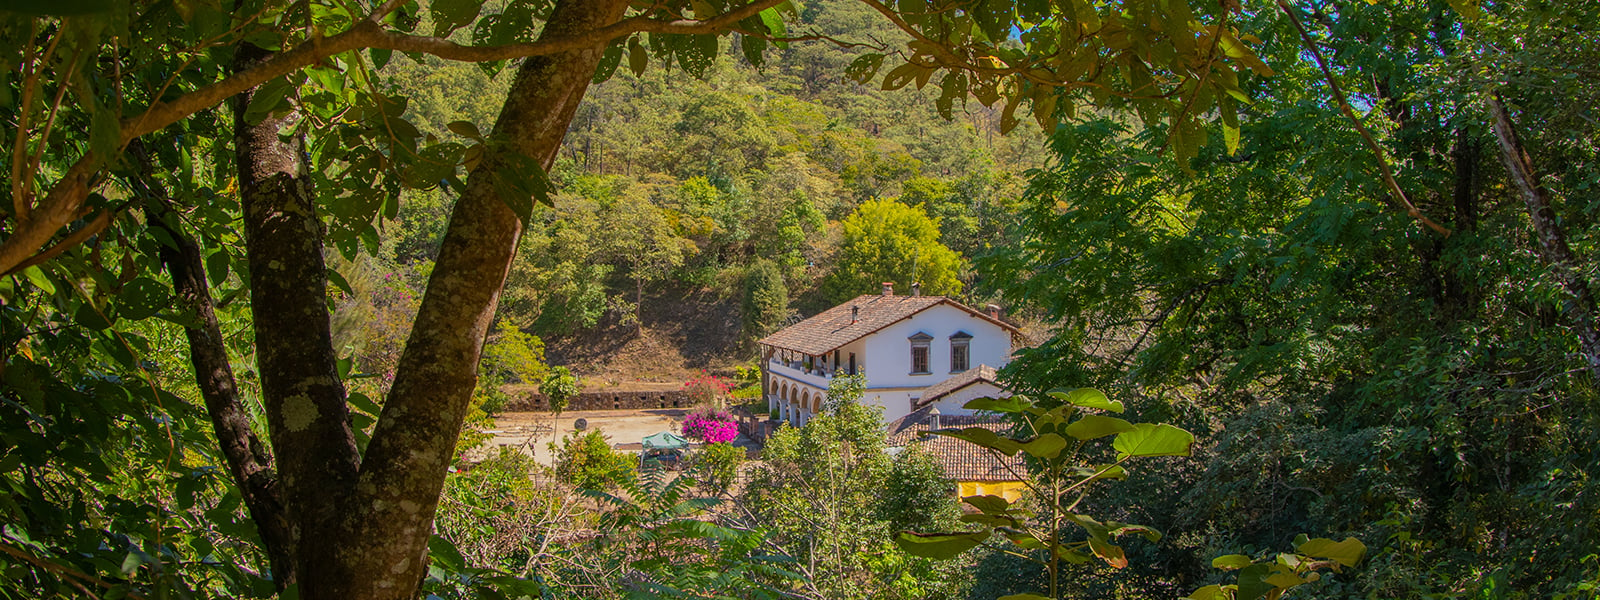 Discover all the wonders of San sebastian del oeste with vallarta adventures